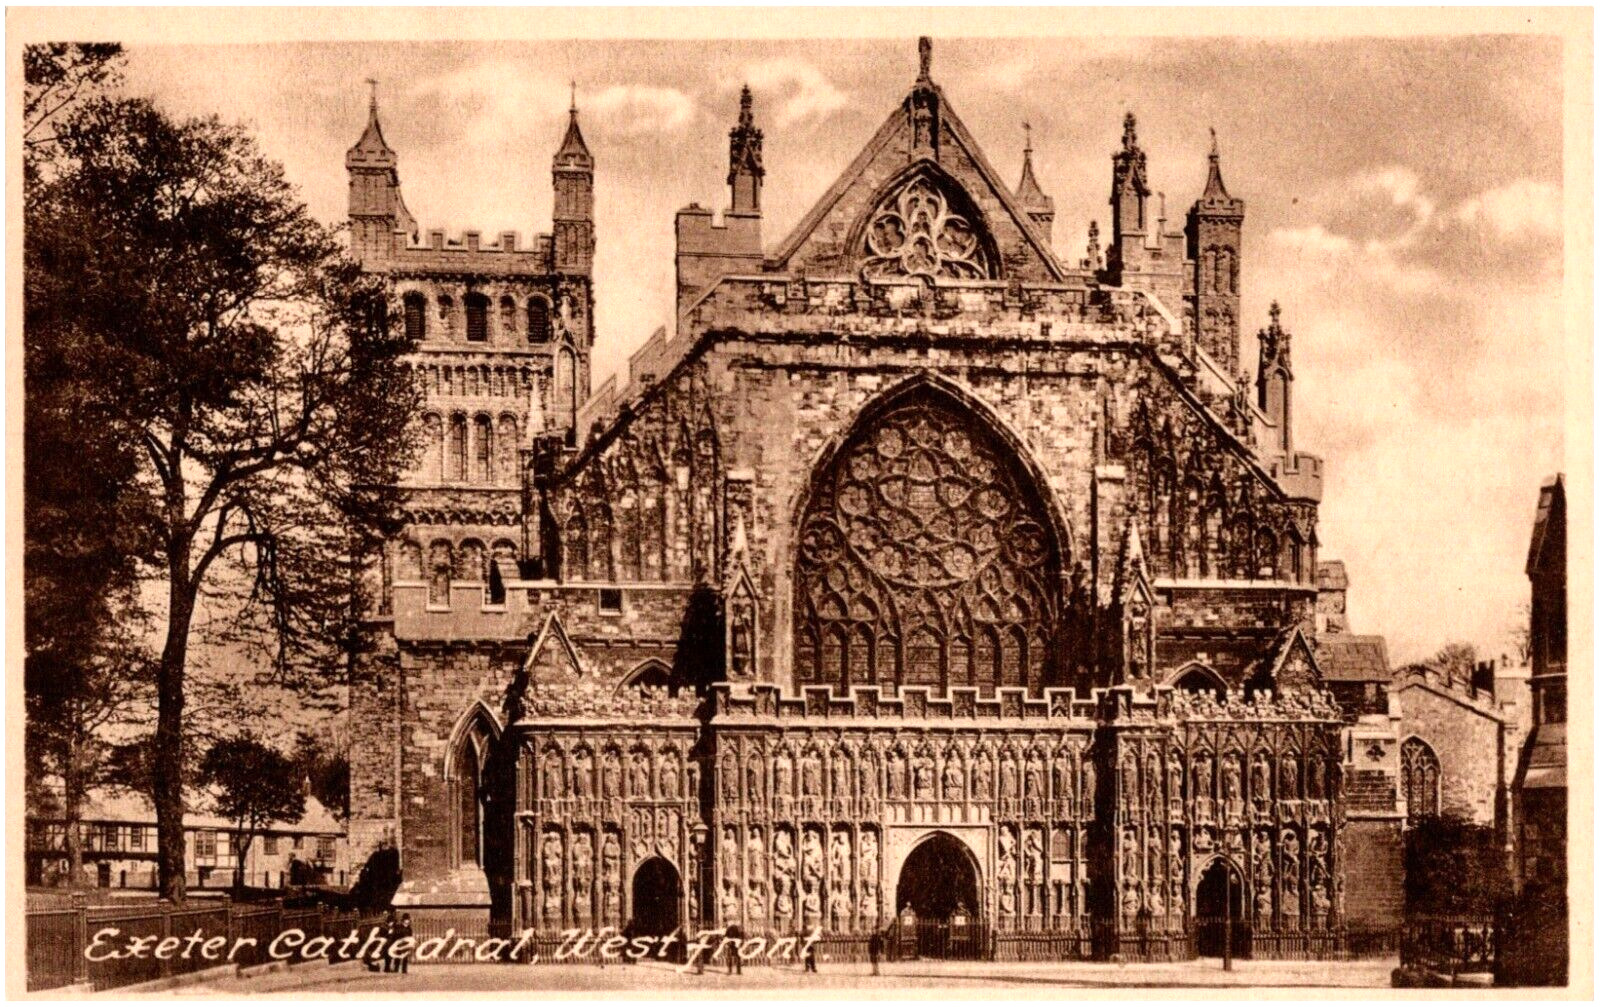 Exeter Cathedral West Front Saint Peter England 1910s Postcard F. Frith Photo